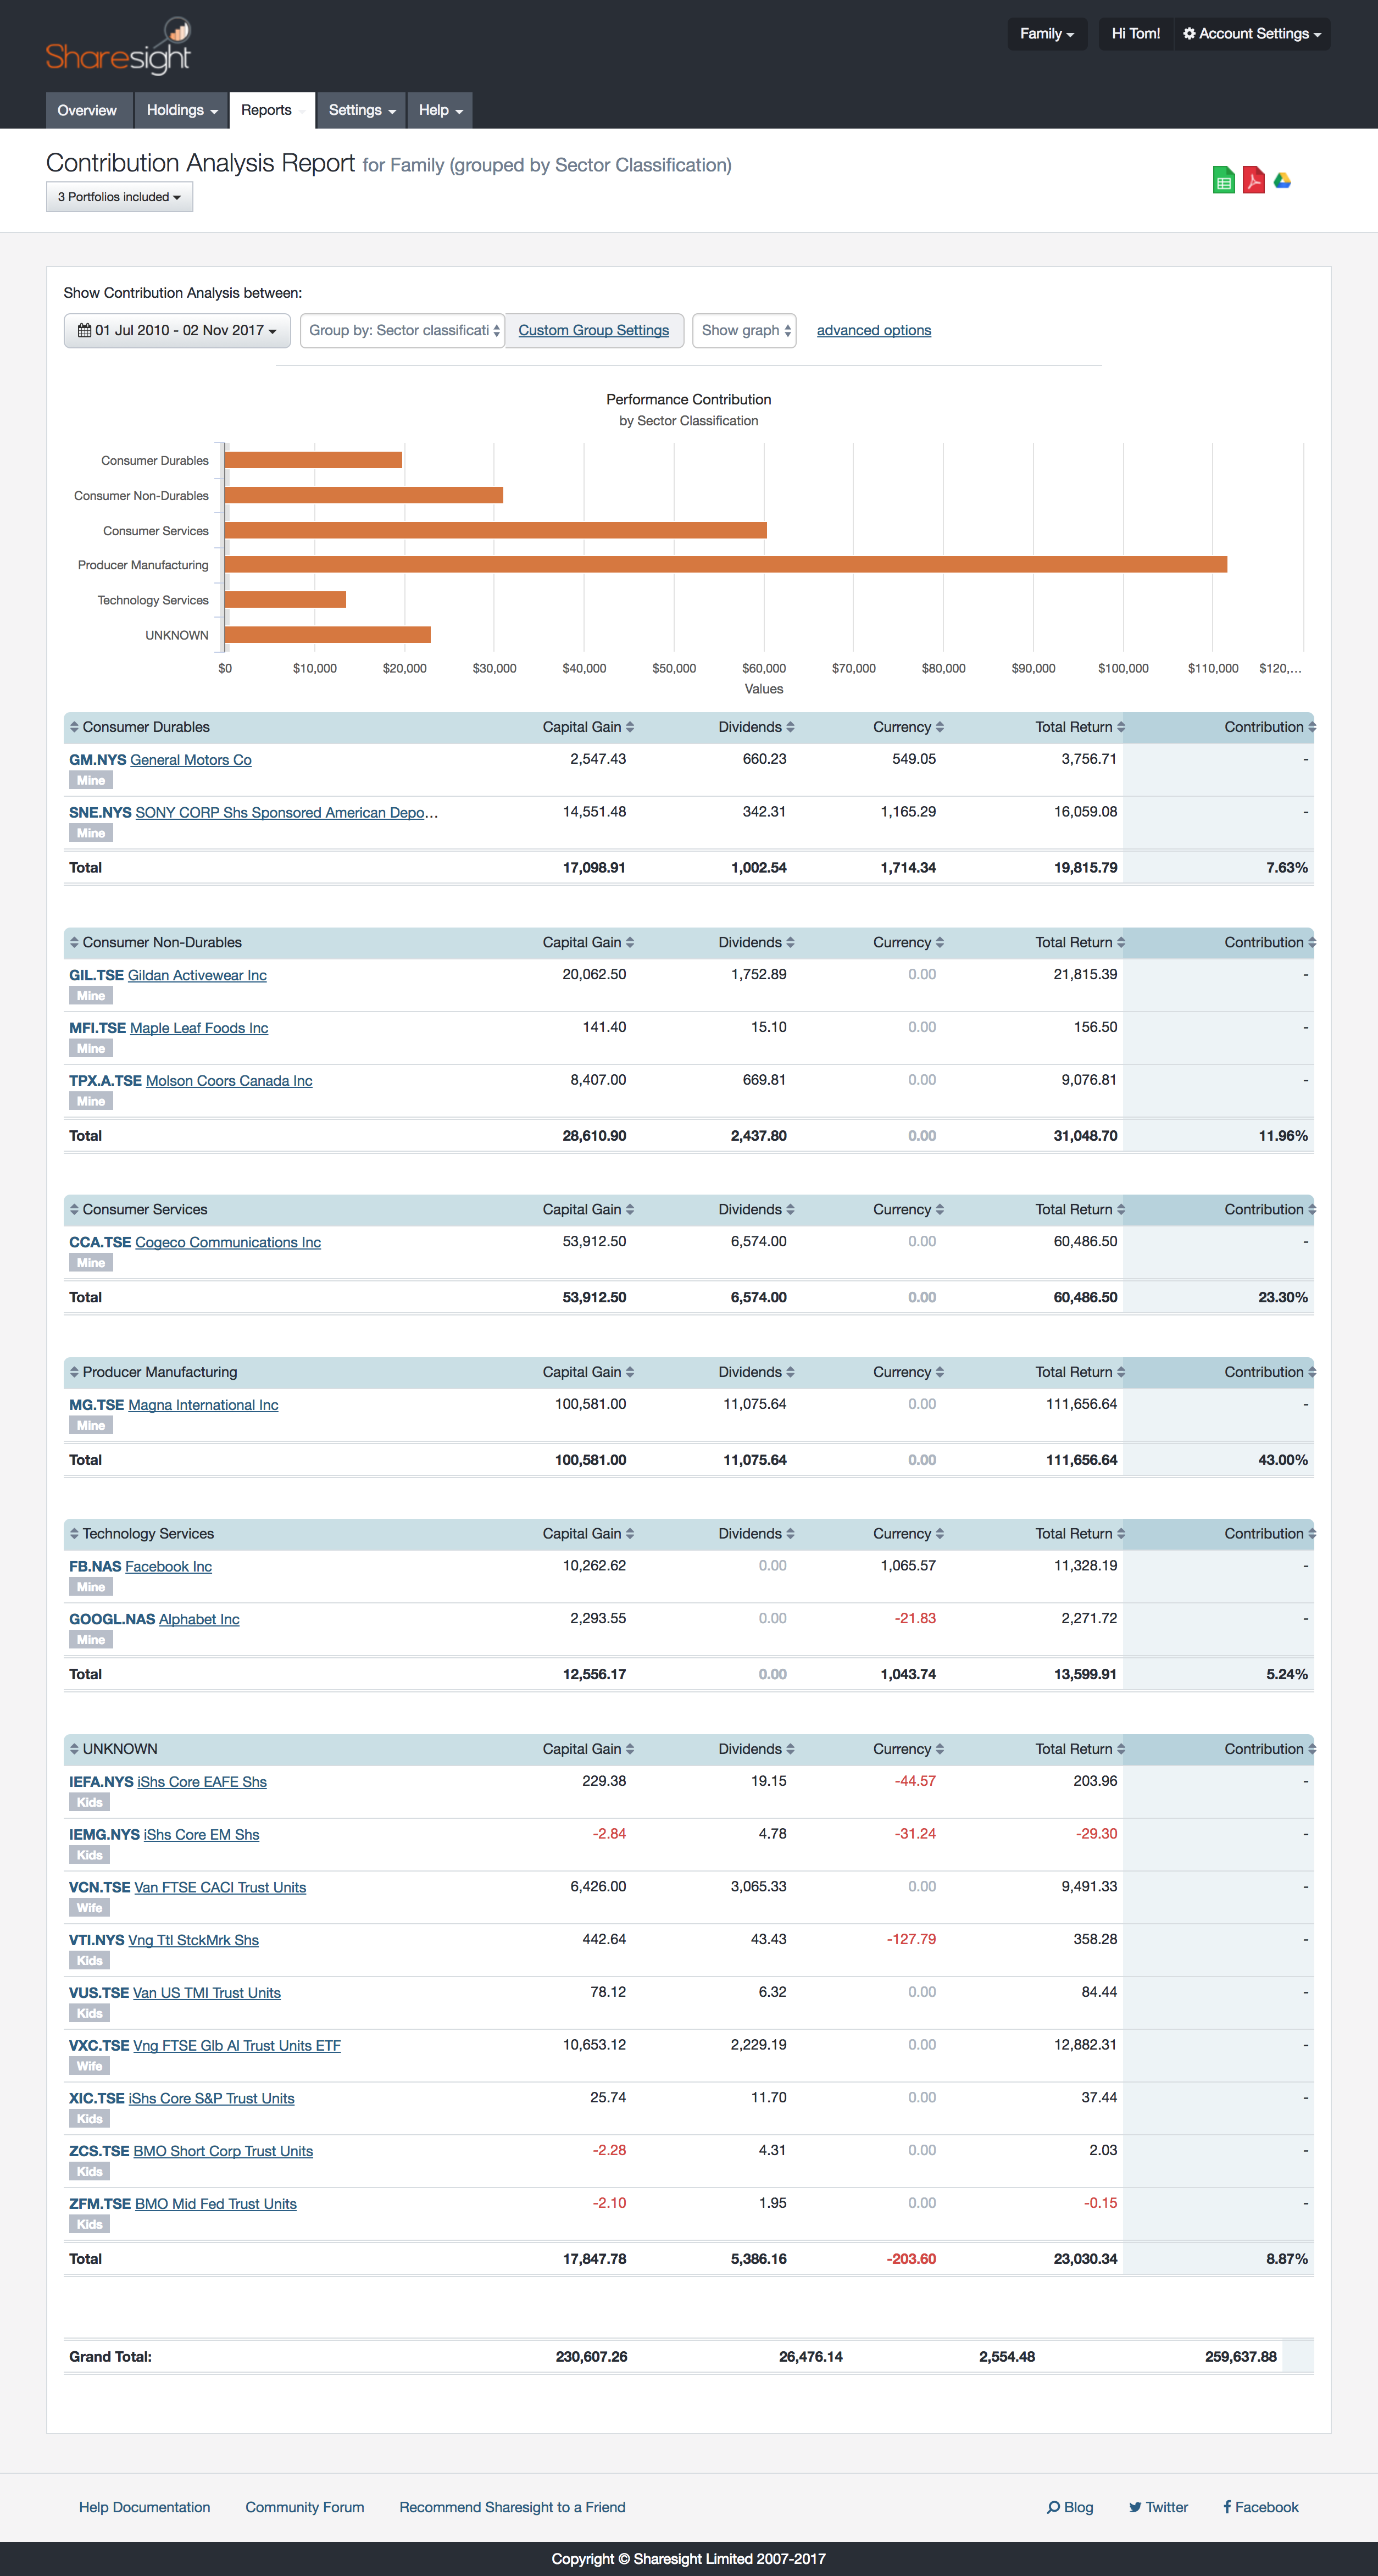 screenshot - Consolidated View - Contribution Analysis Report